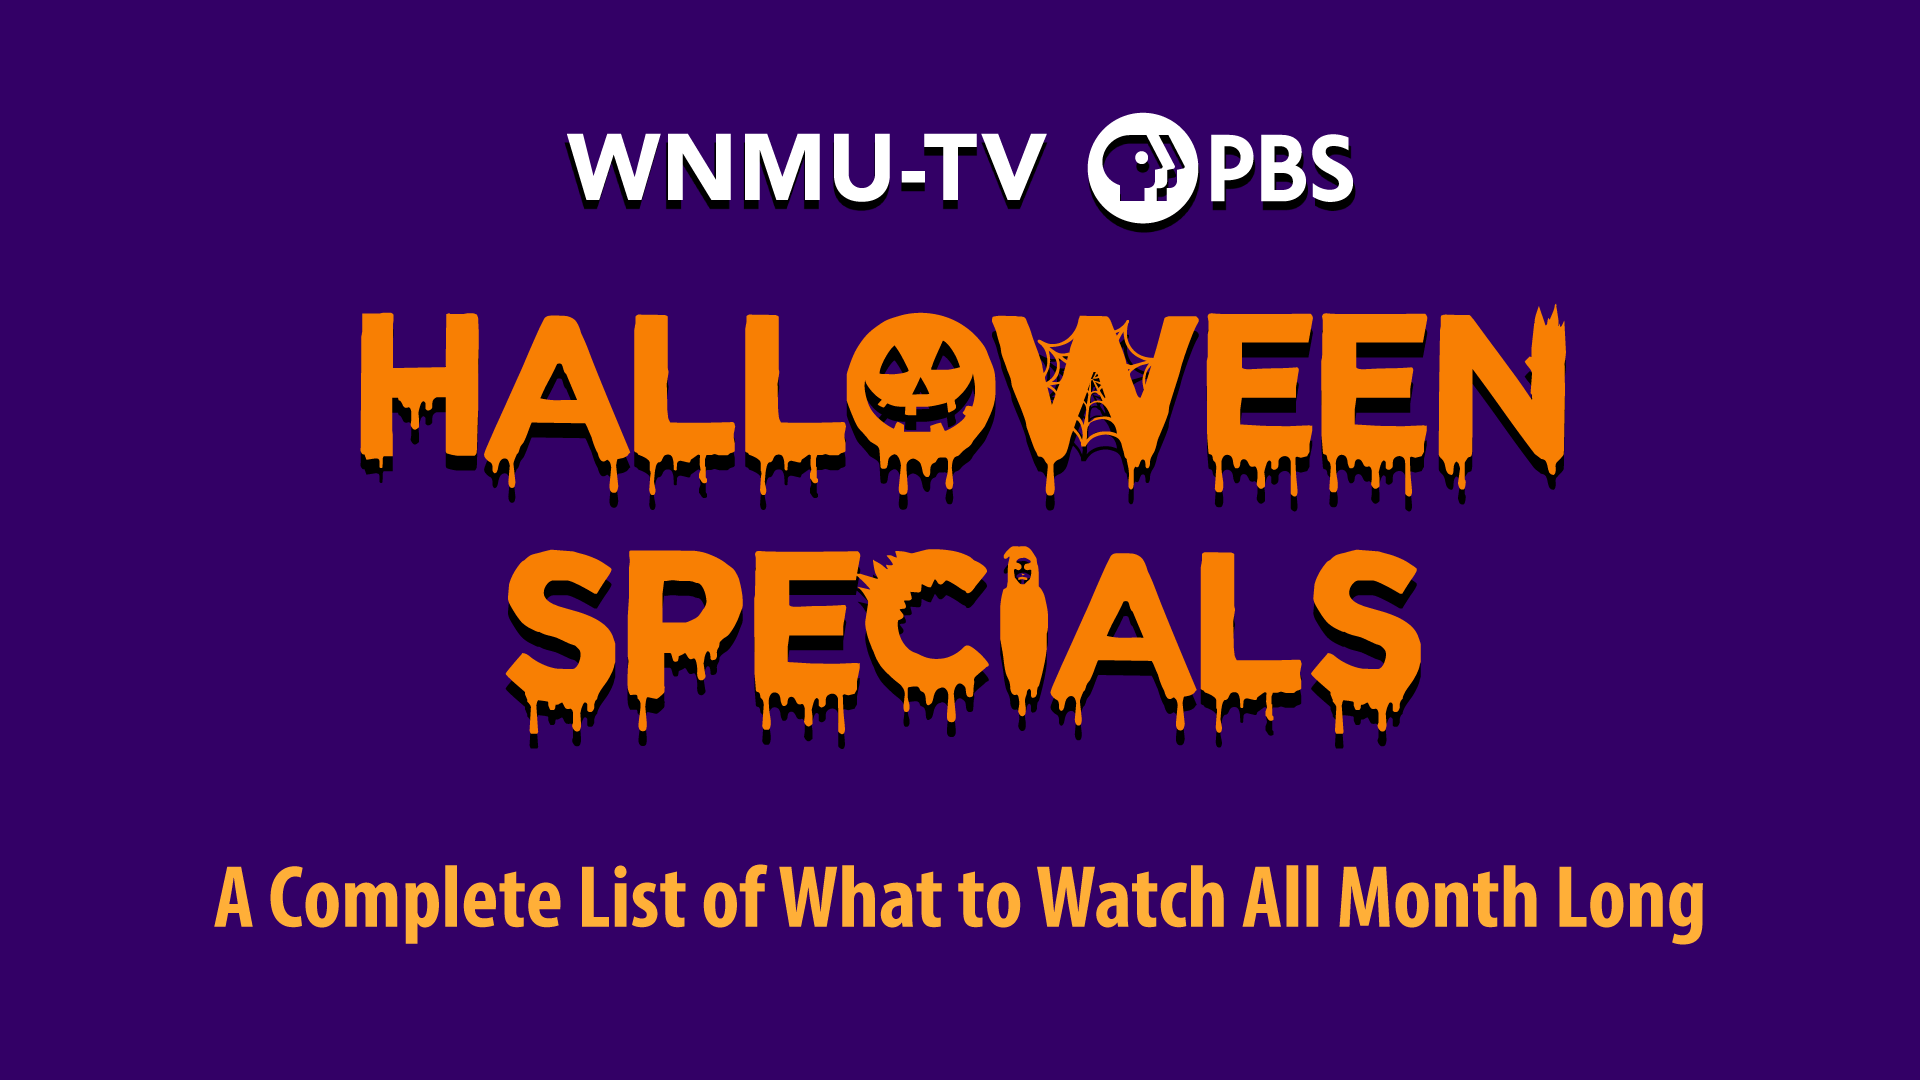 WNMU-TV Halloween Specials: A Complete List of What to Watch All Month Long